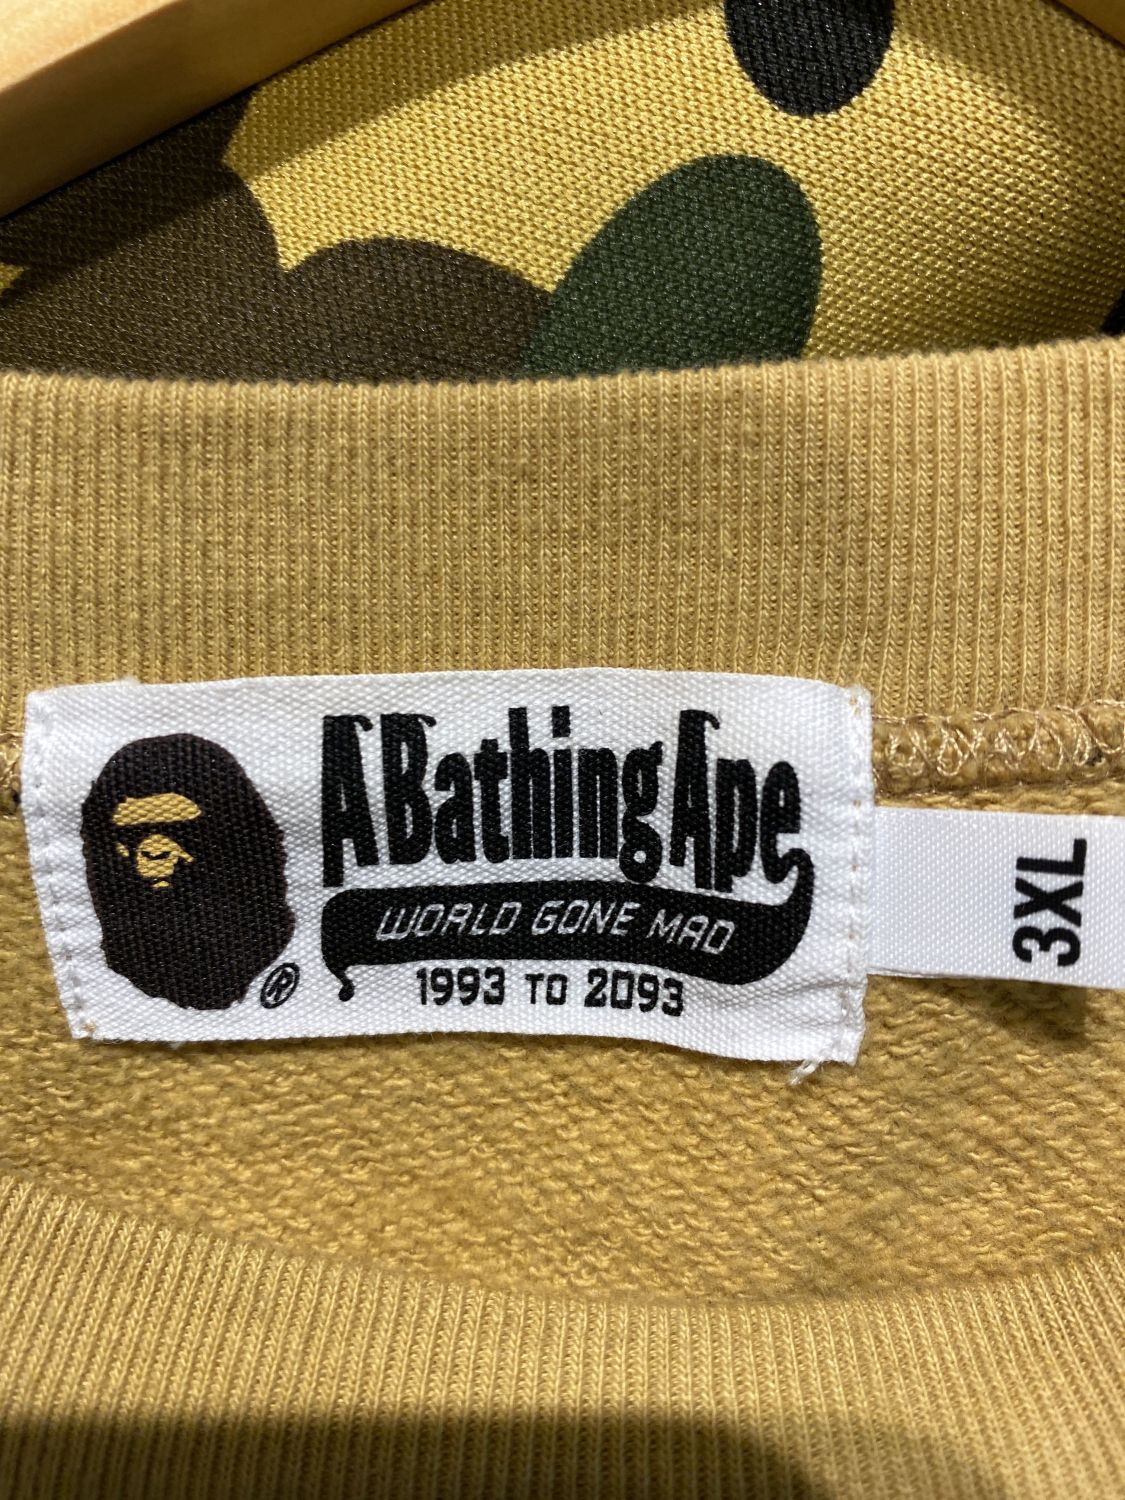 6920 - A Bathing Ape World Gone Mad 1993 To 2093 Camo Hoodie | Item ...